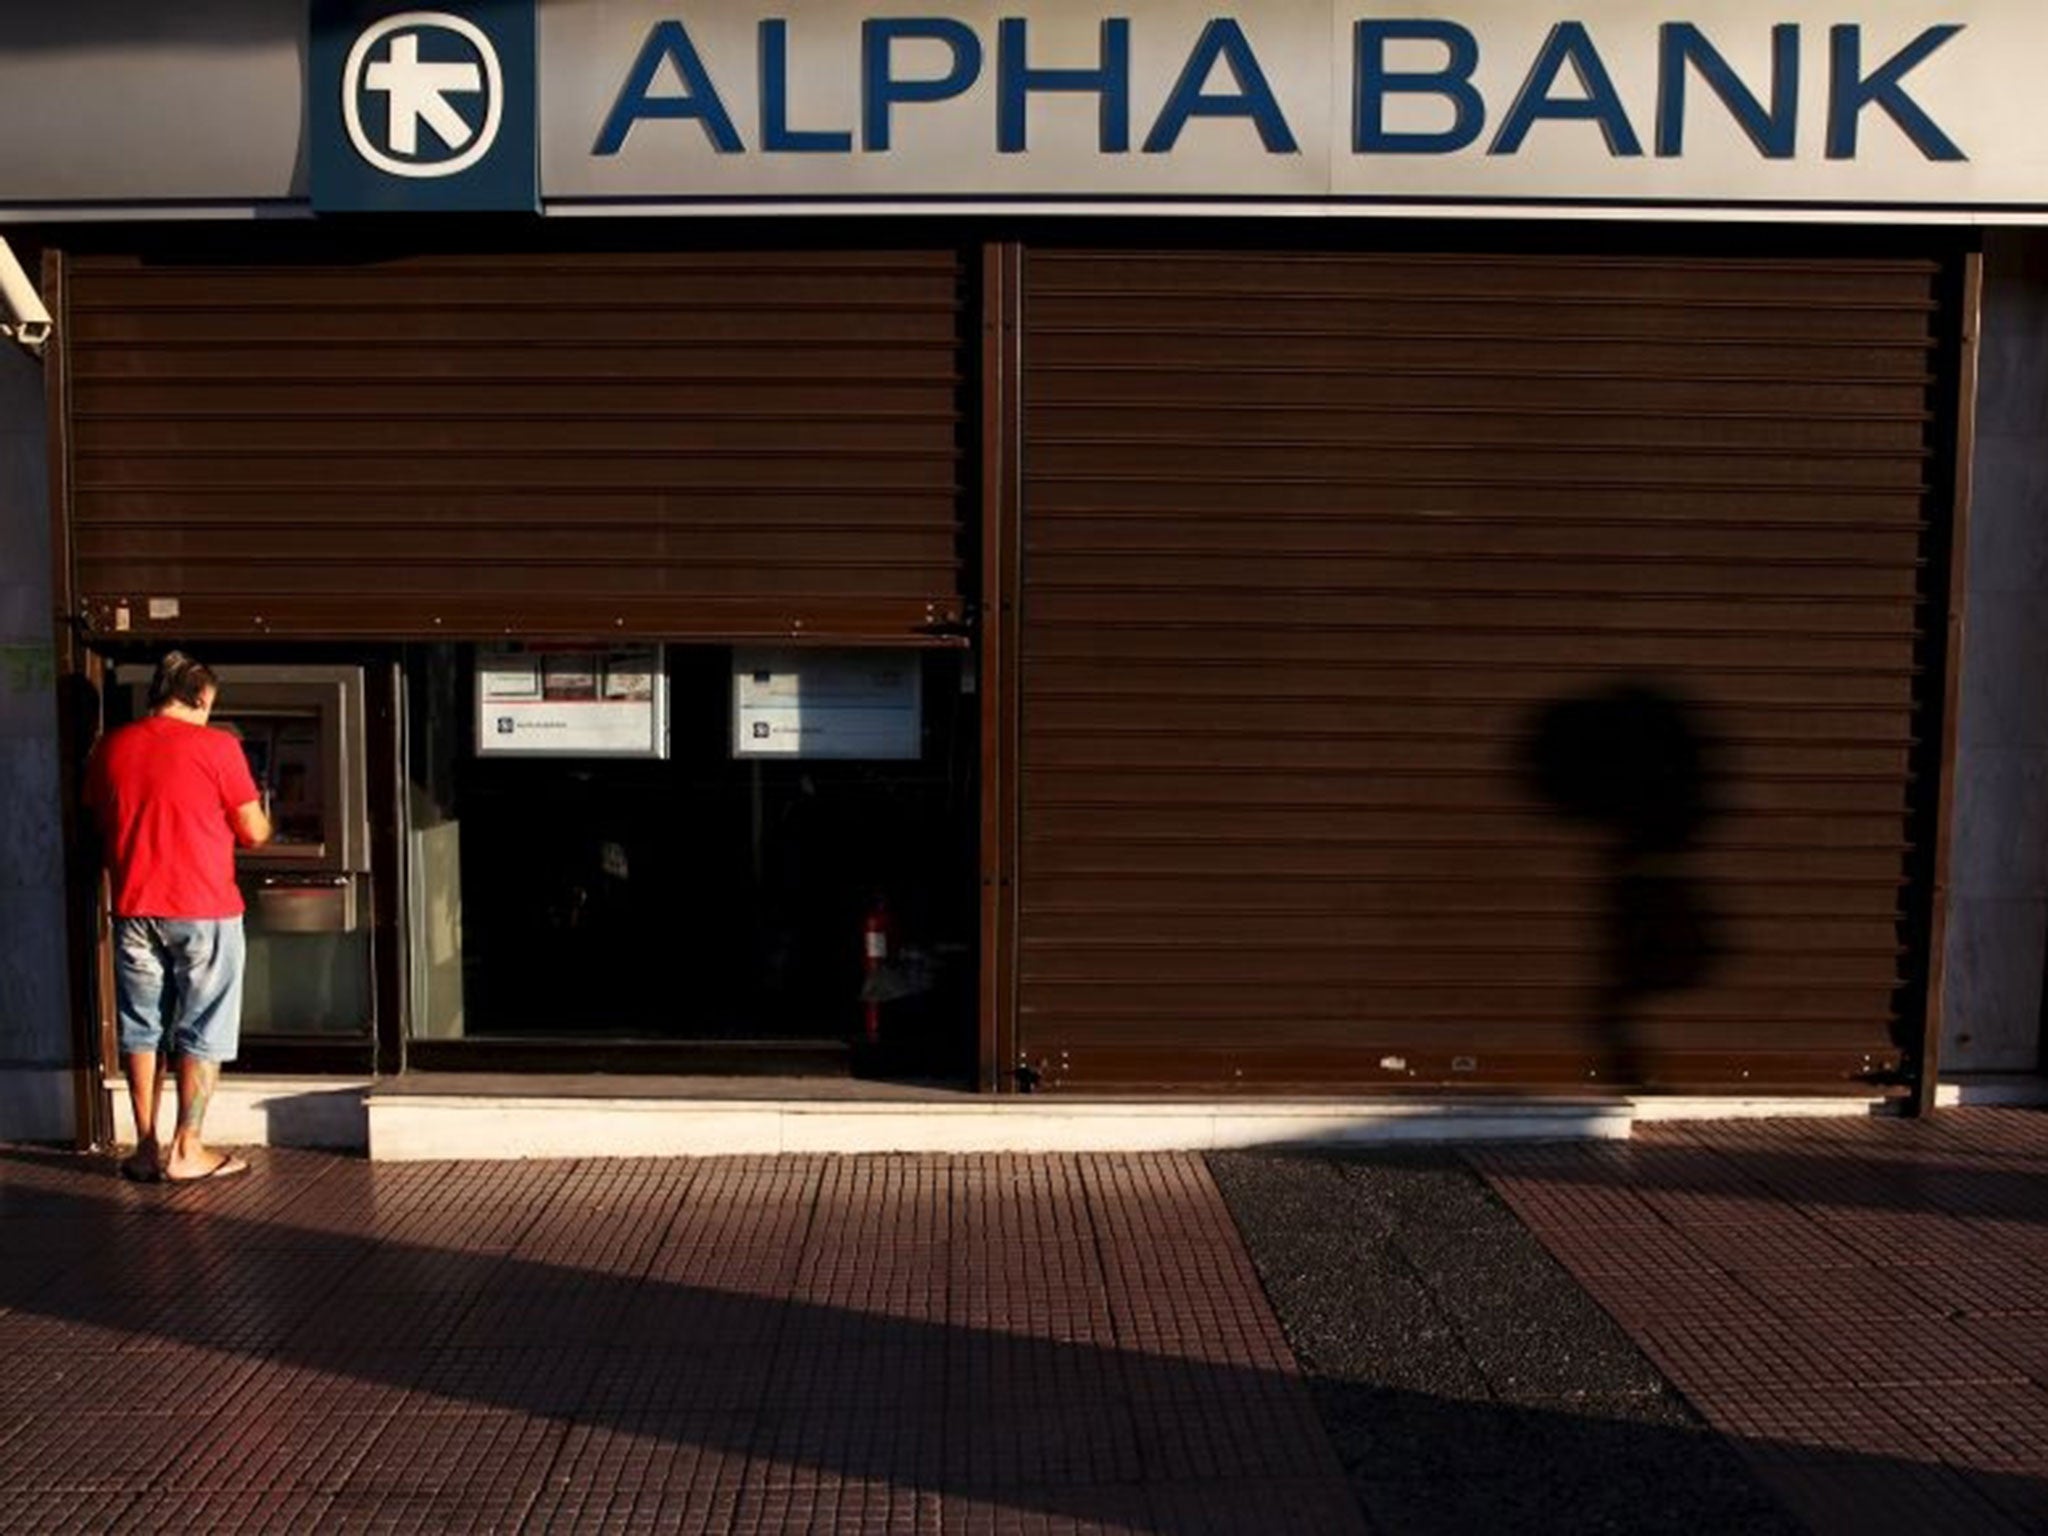 A man withdraws money at an Alpha Bank branch ATM in central Athens, Greece, July 19, 2015. The Greek government ordered banks to open on Monday, three weeks after they were shut down to prevent the system collapsing under a flood of withdrawals, as Prime